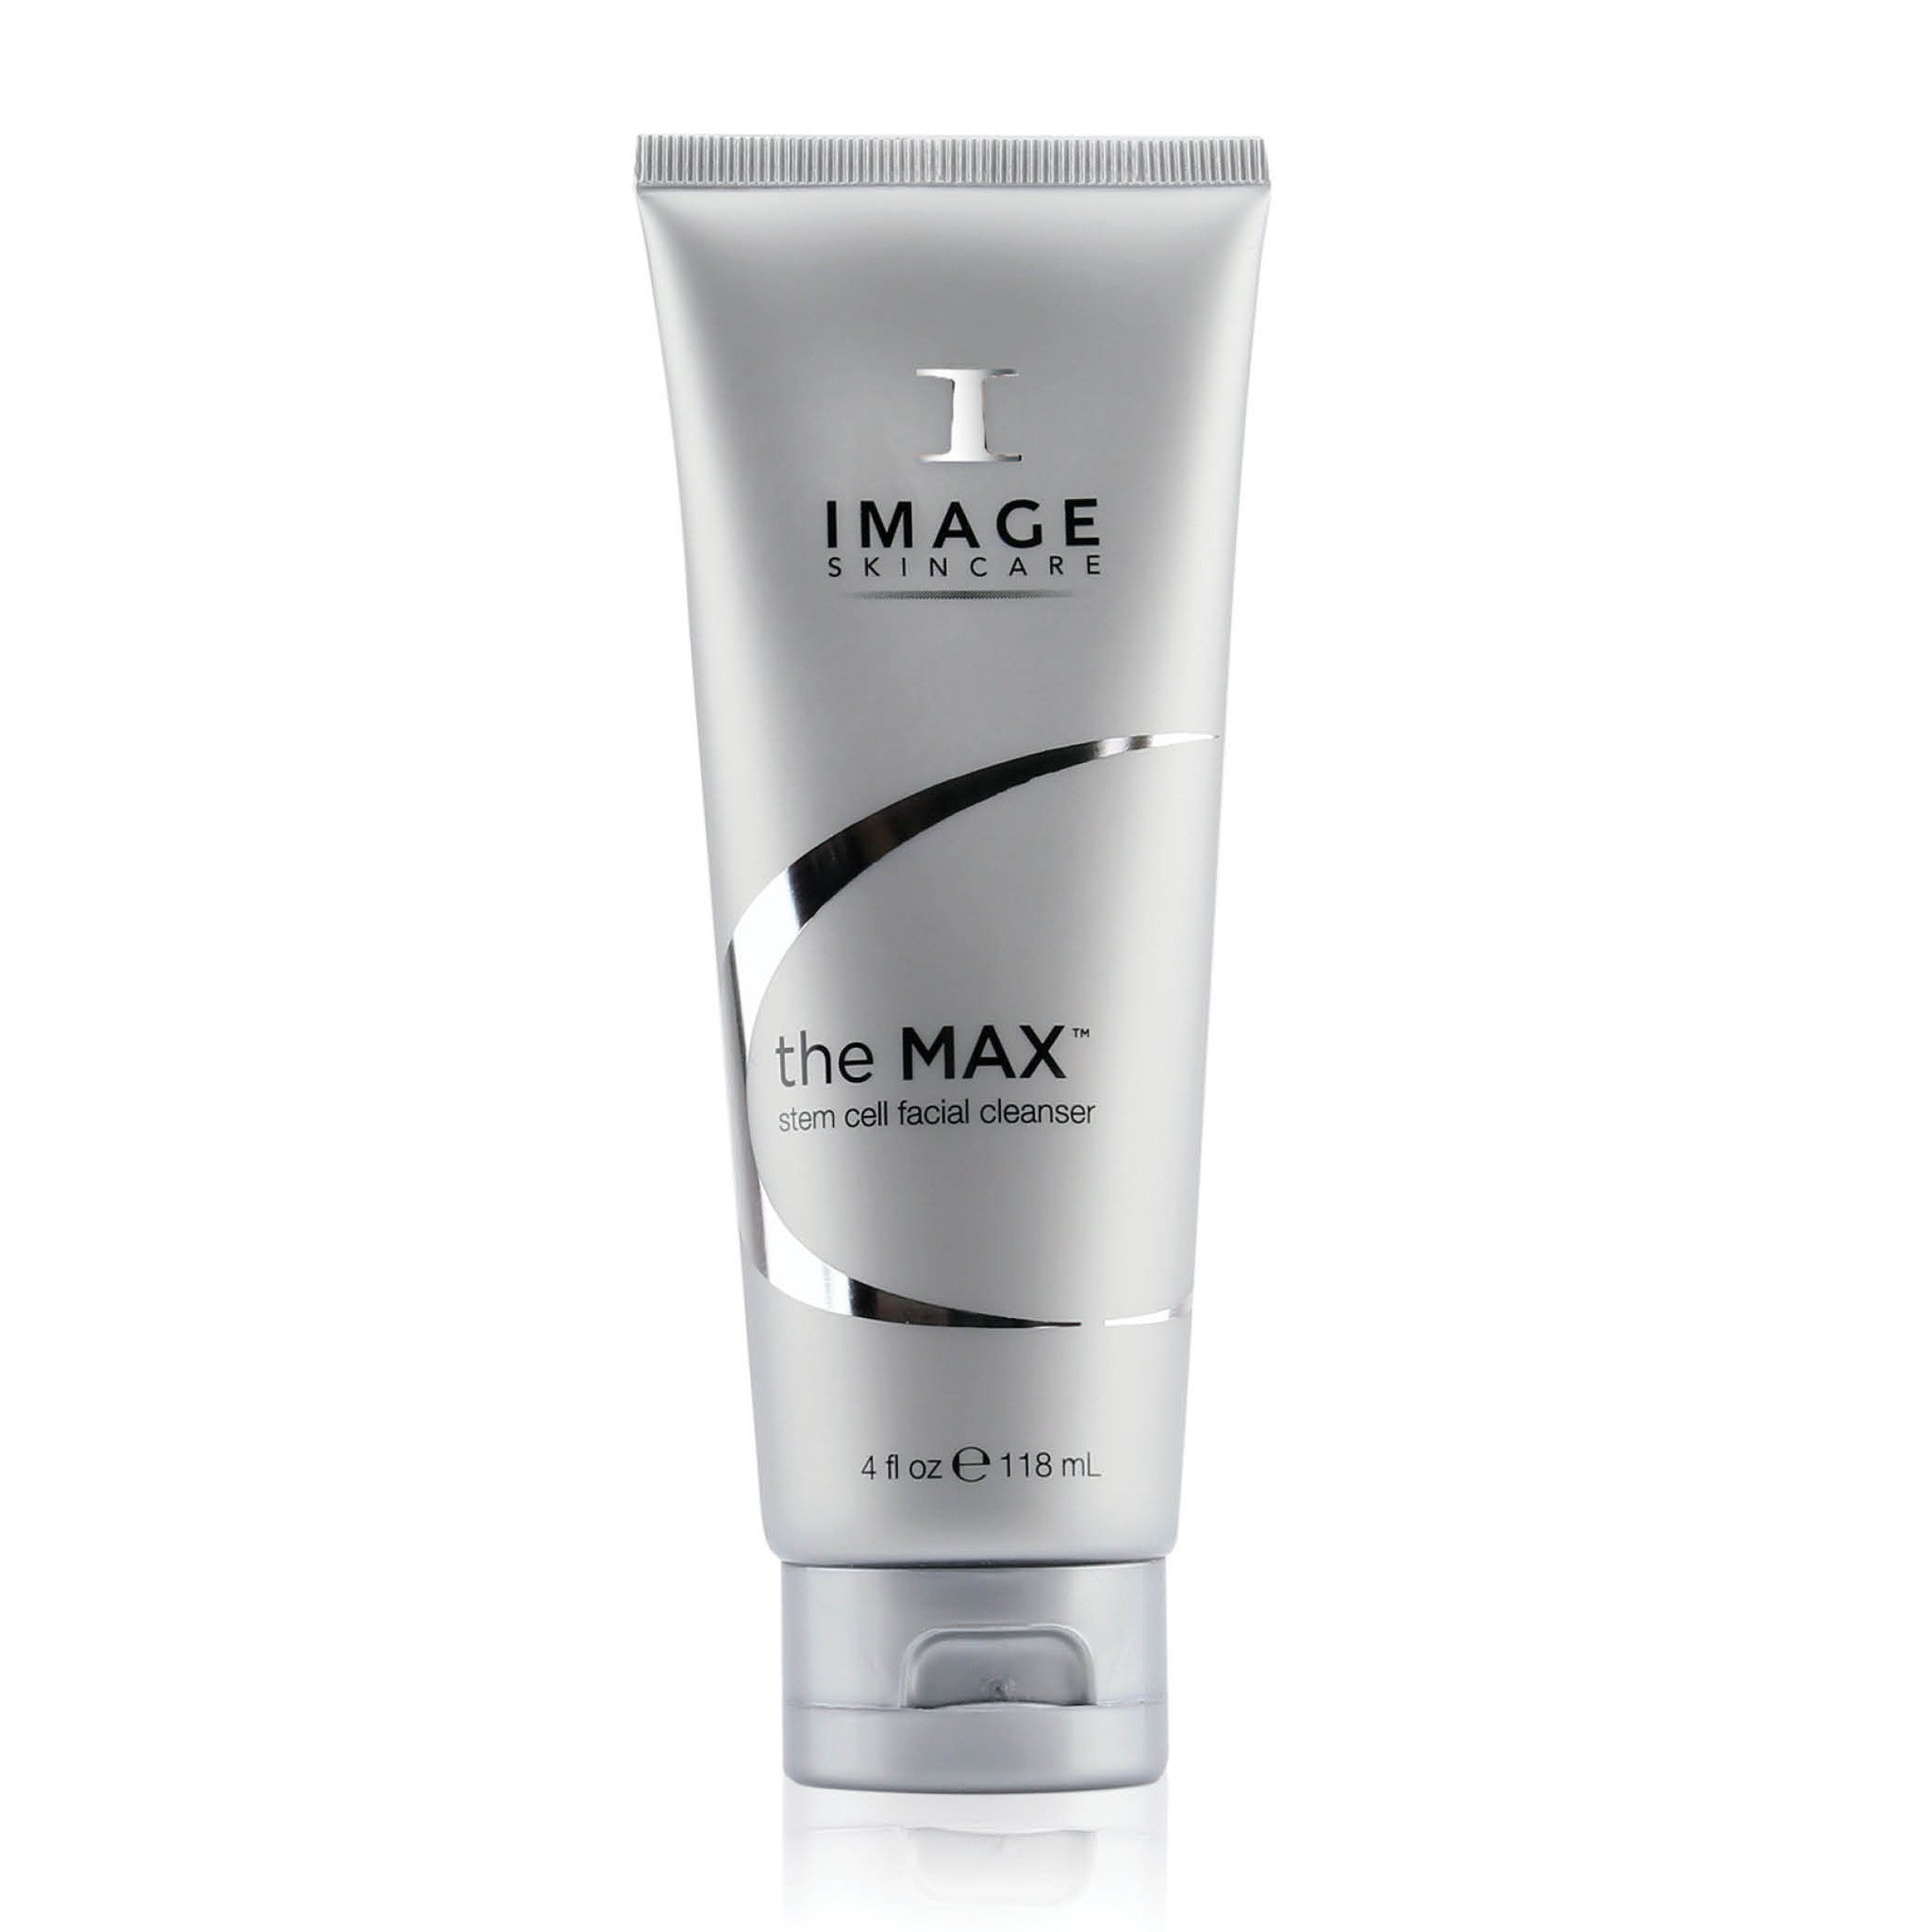 The MAX Stem Cell Facial Cleanser